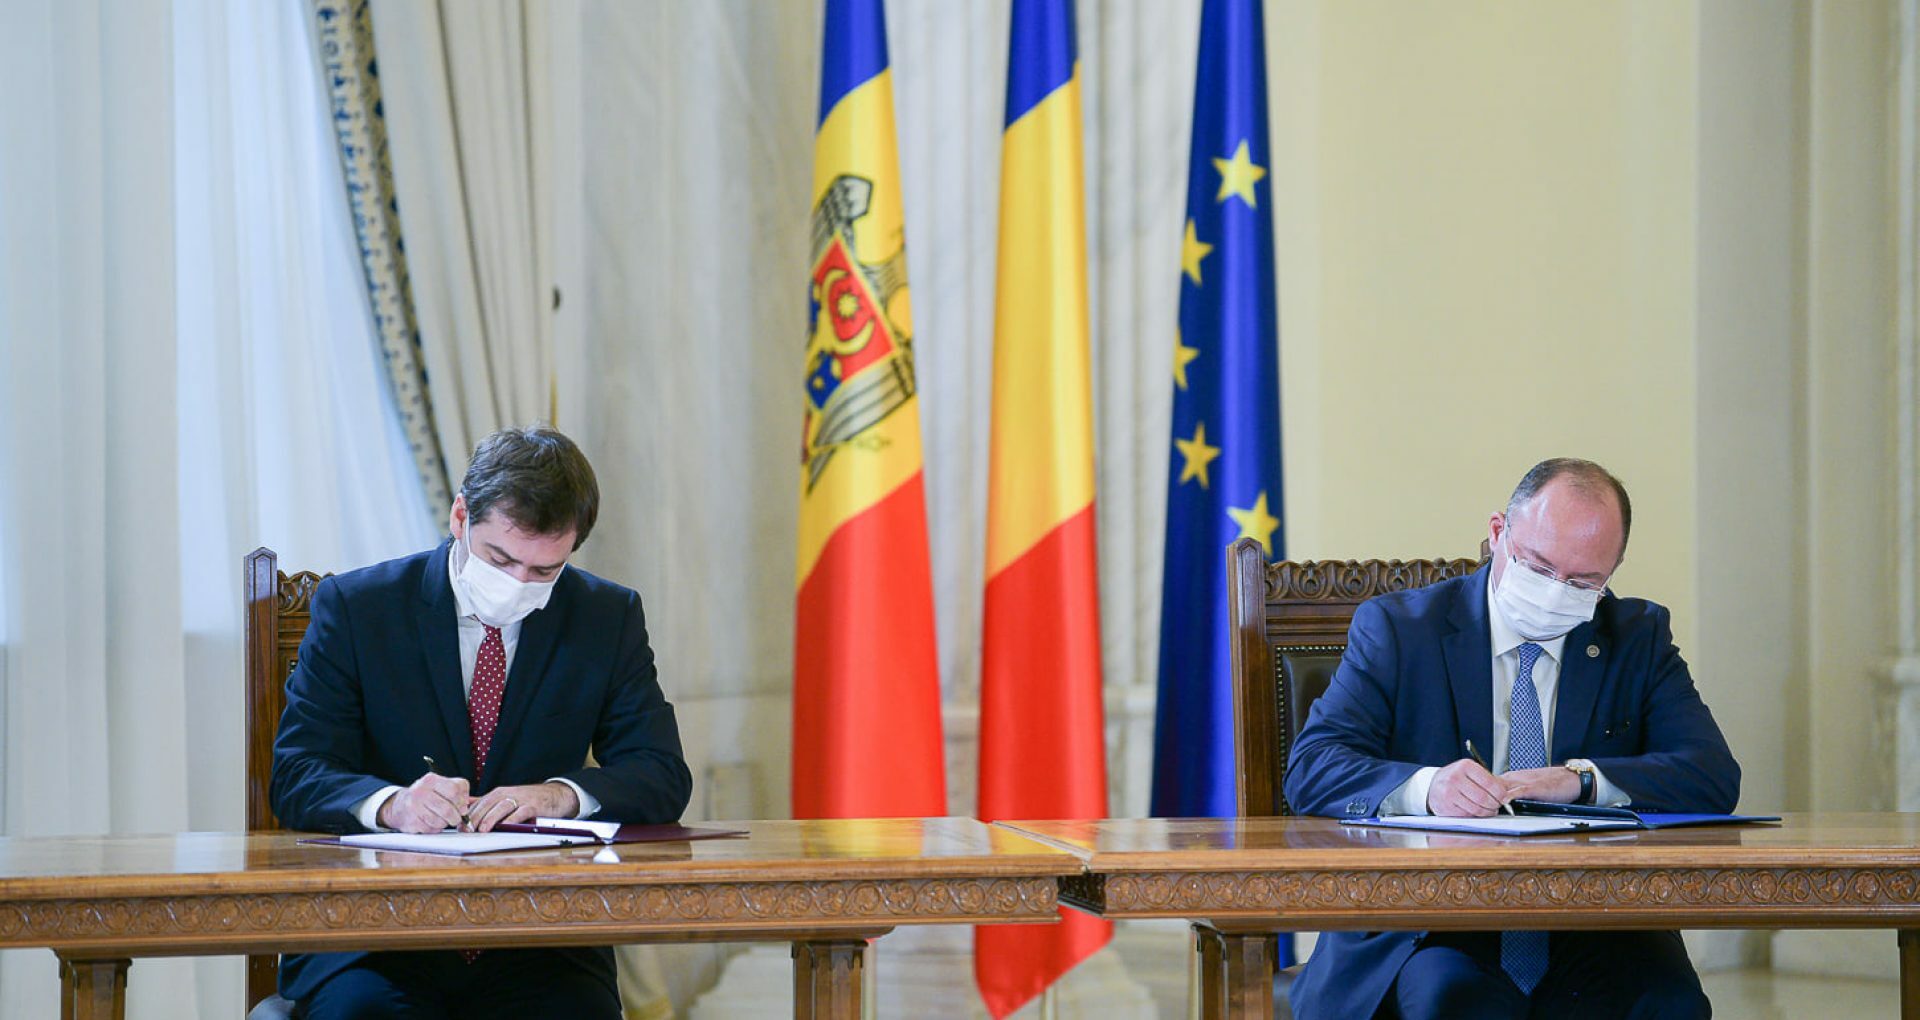 Minister of Foreign Affairs of Moldova, Nicu Popescu Signed Together with the Minister of Foreign Affairs of Romania, Bogdan Aurescu the Roadmap on Priority Areas of Cooperation between Moldova and Romania